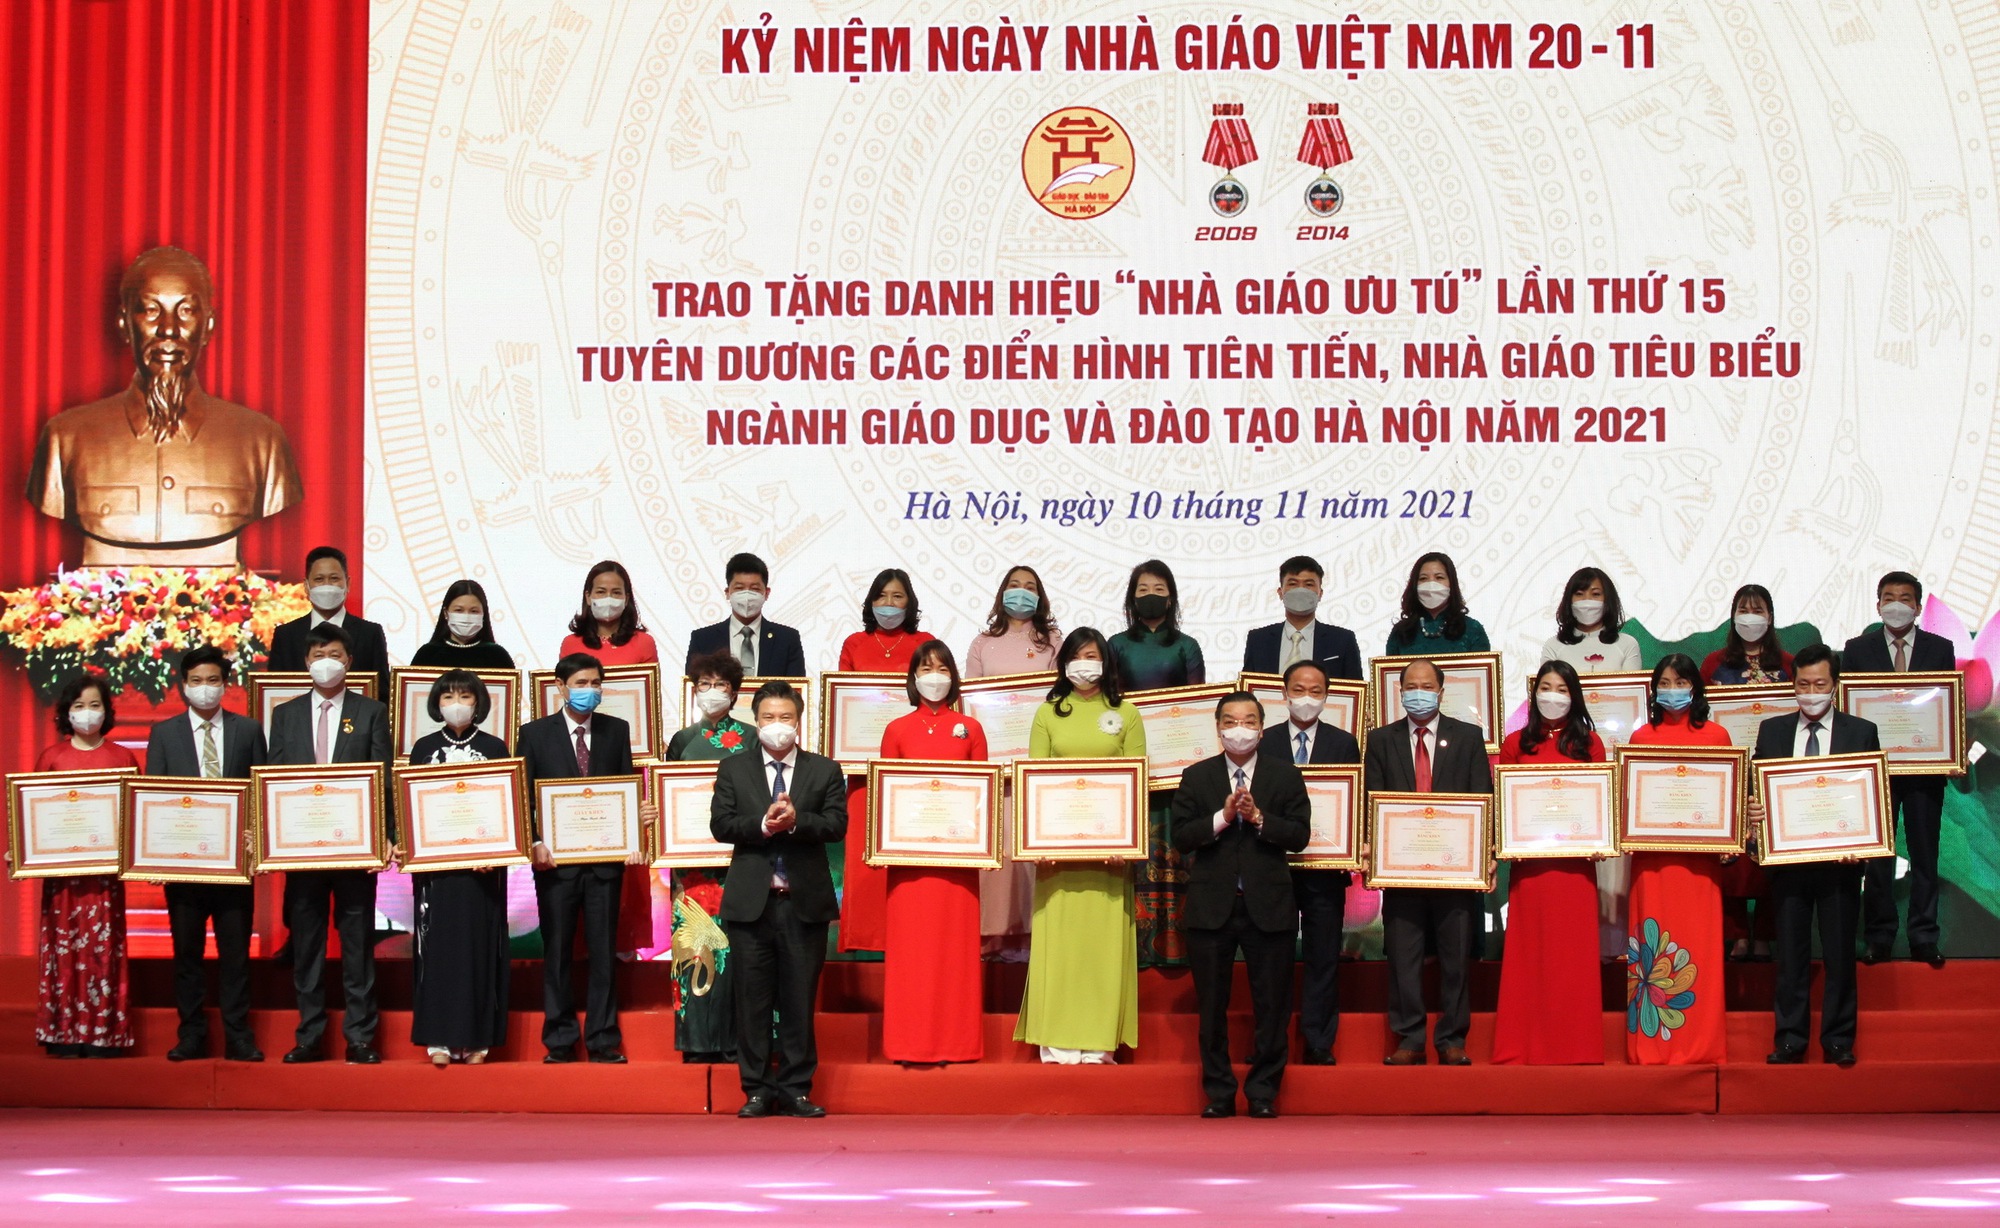 Latest procedures for consideration for awarding the Teacher of Merit title in Vietnam